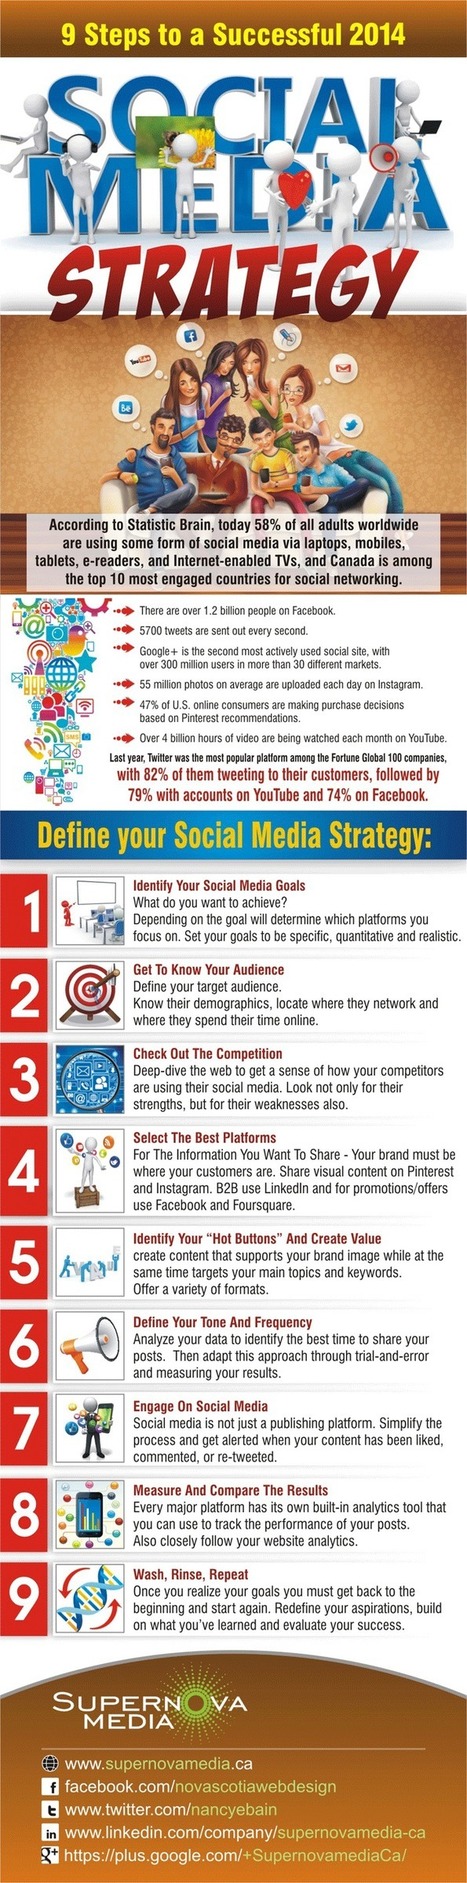 9 Steps to a successful 2014 social media strategy w/infographic. - Supernova Media | information analyst | Scoop.it